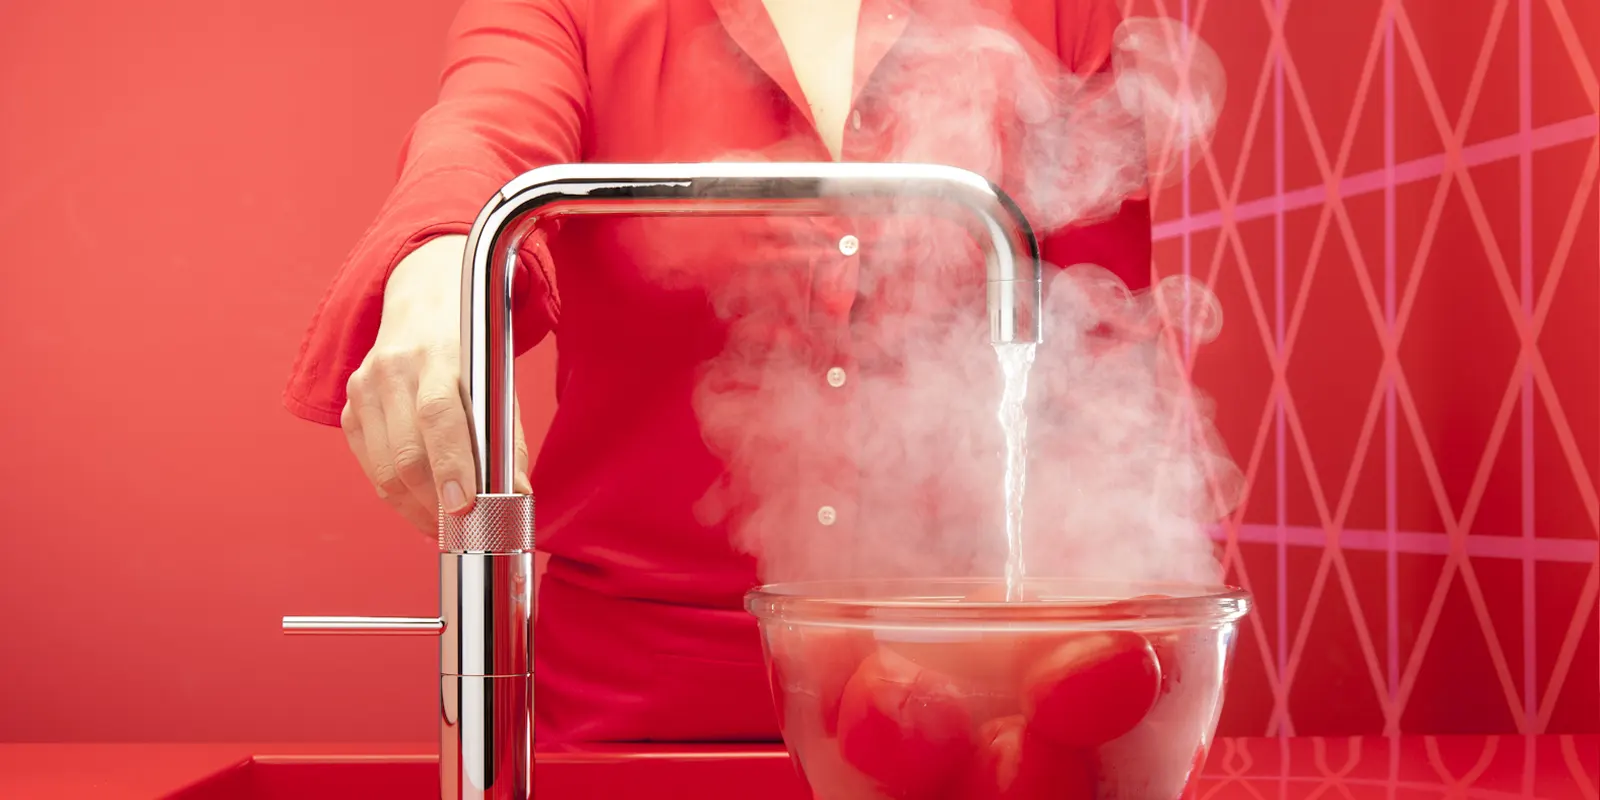 Boiling water flowing from a modern boiling water tap into a pan, symbolizing vulnerability to limescale buildup